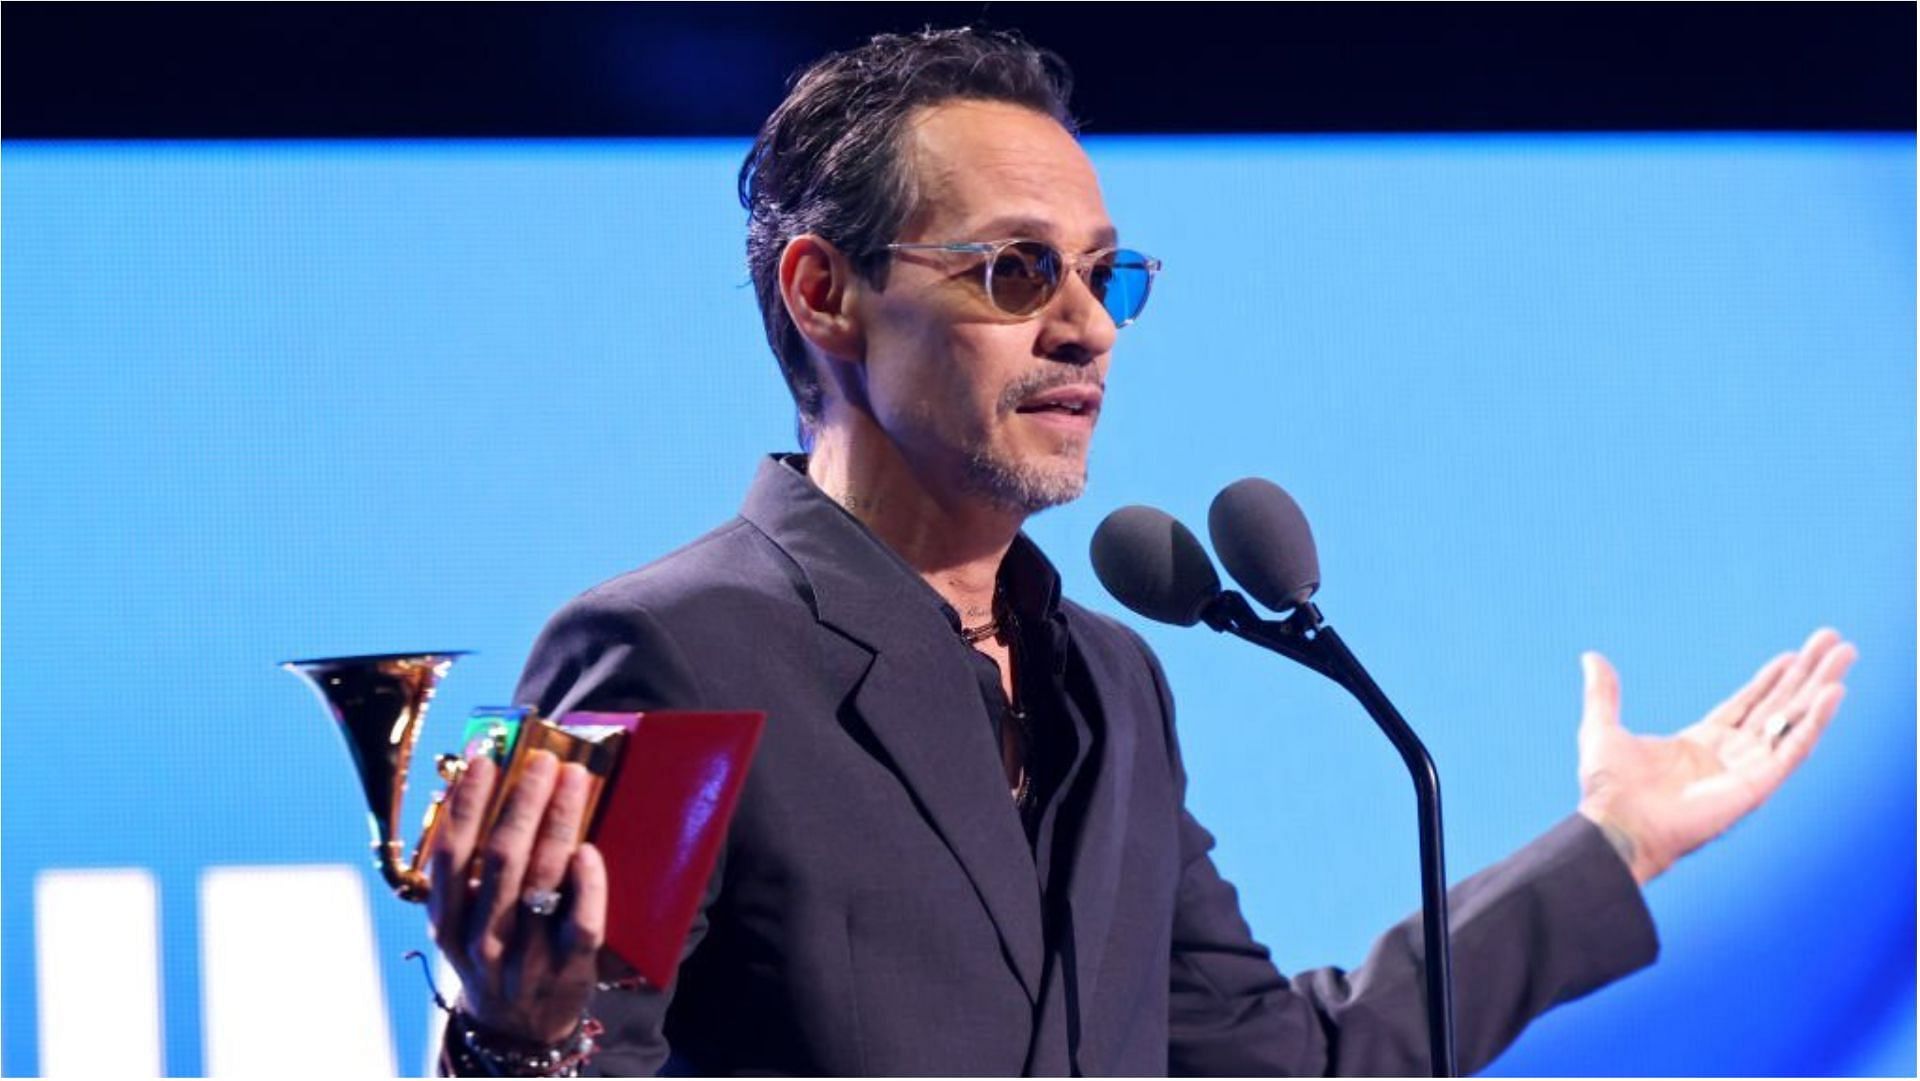 Marc Anthony has earned a lot from his career in the entertainment industry (Image via Rodrigo Varela/Getty Images)